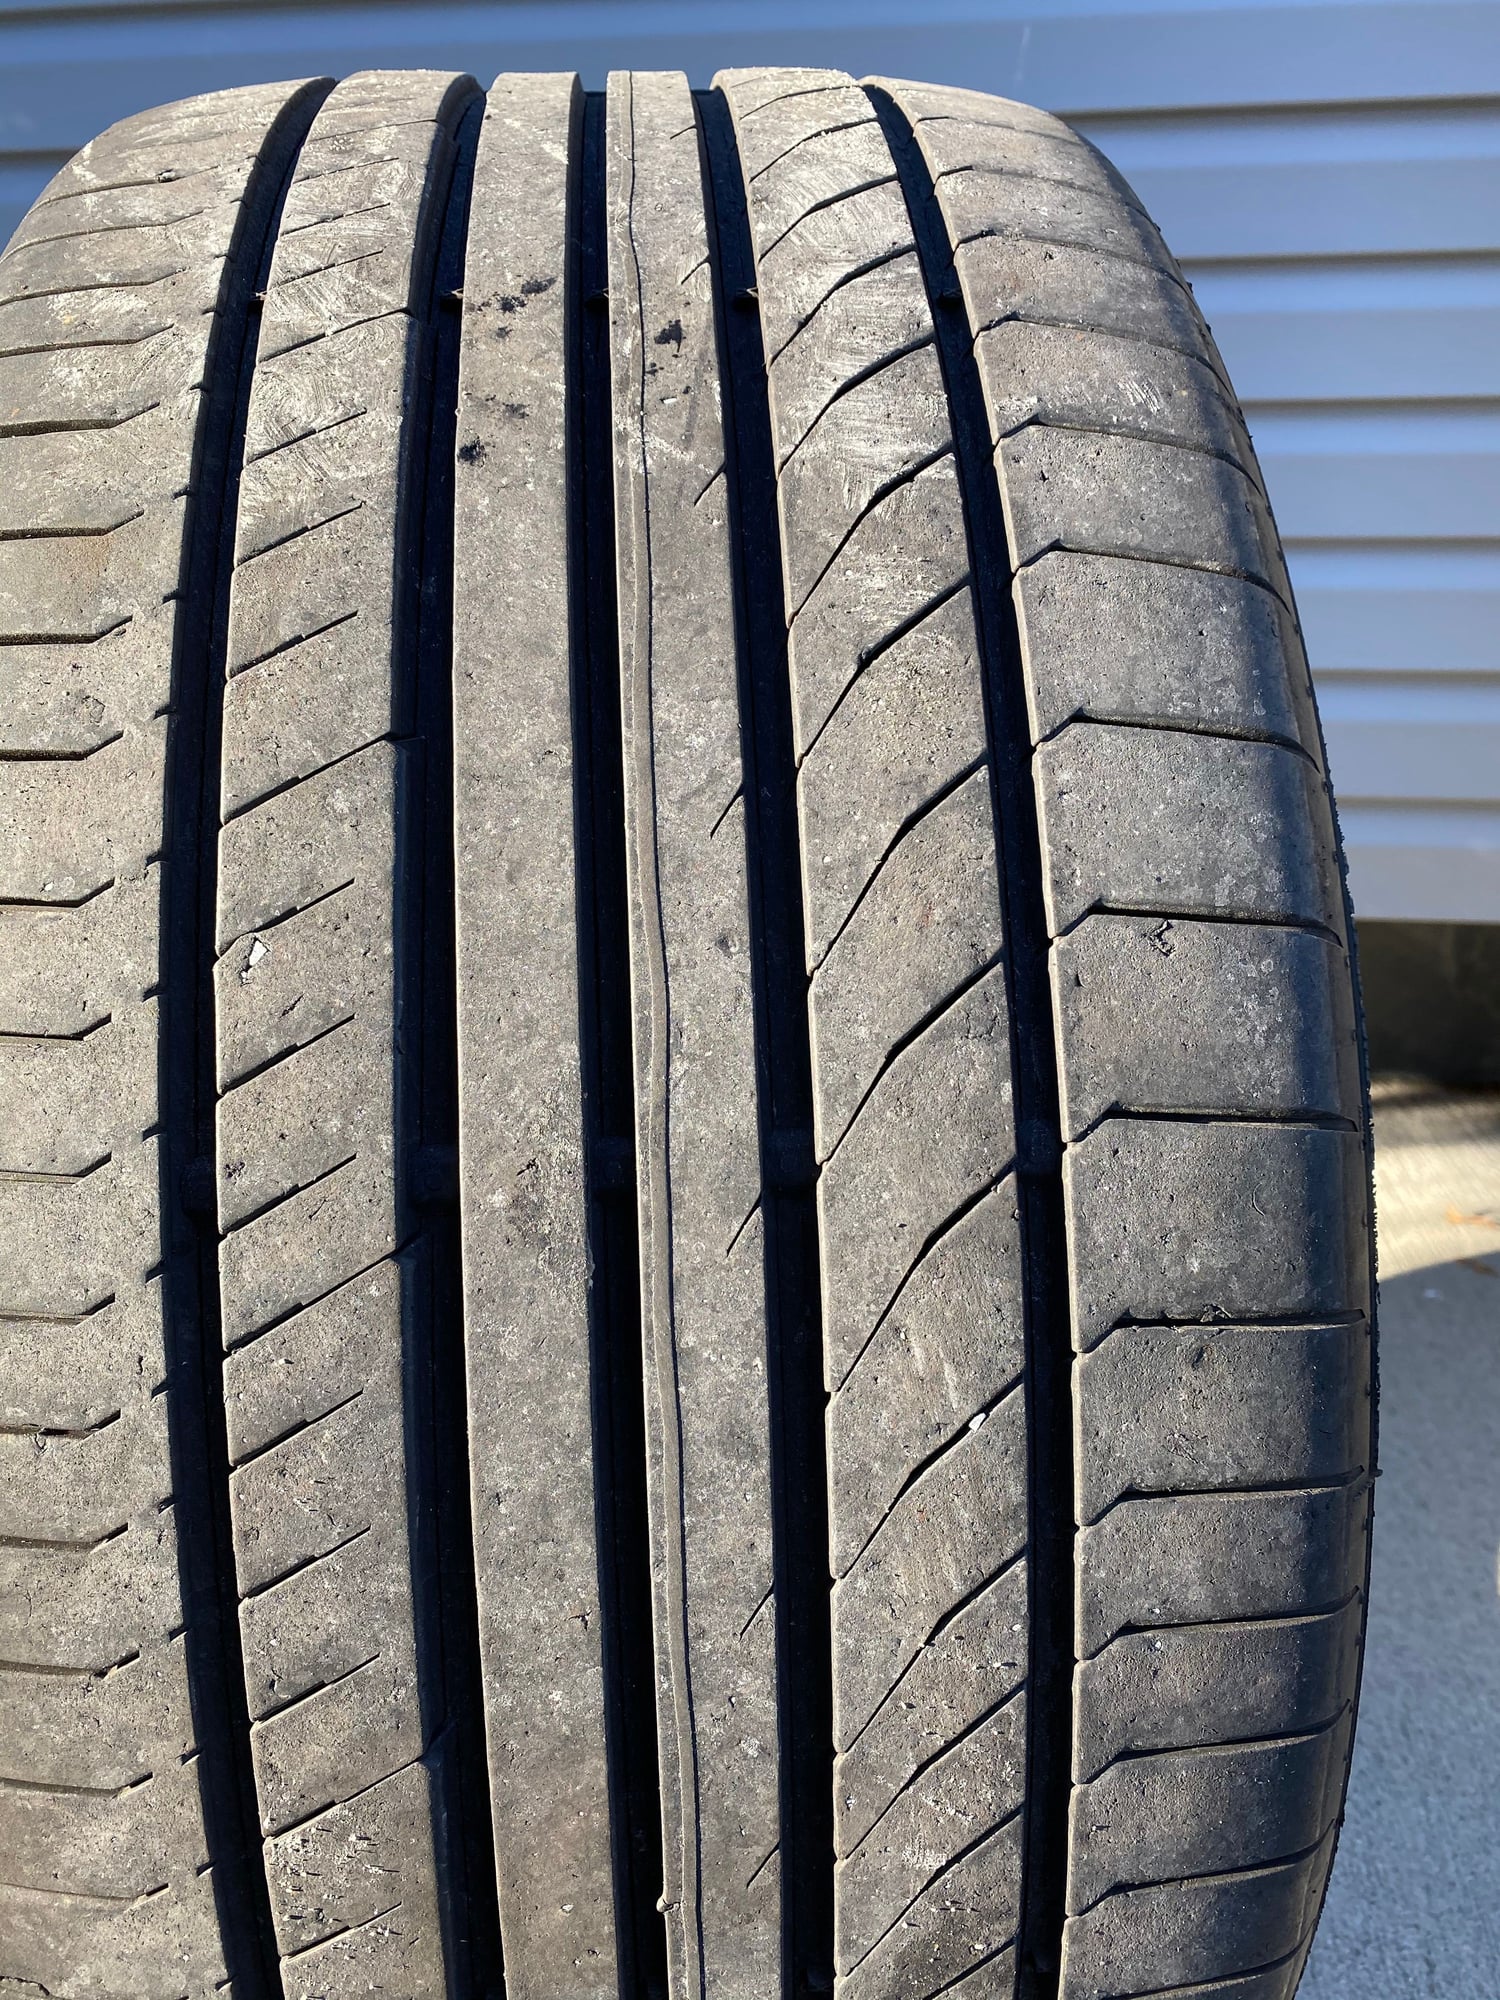 Wheels and Tires/Axles - 2 Continental Tyres - Used - All Years Any Make All Models - Elmwood Park, NJ 07407, United States